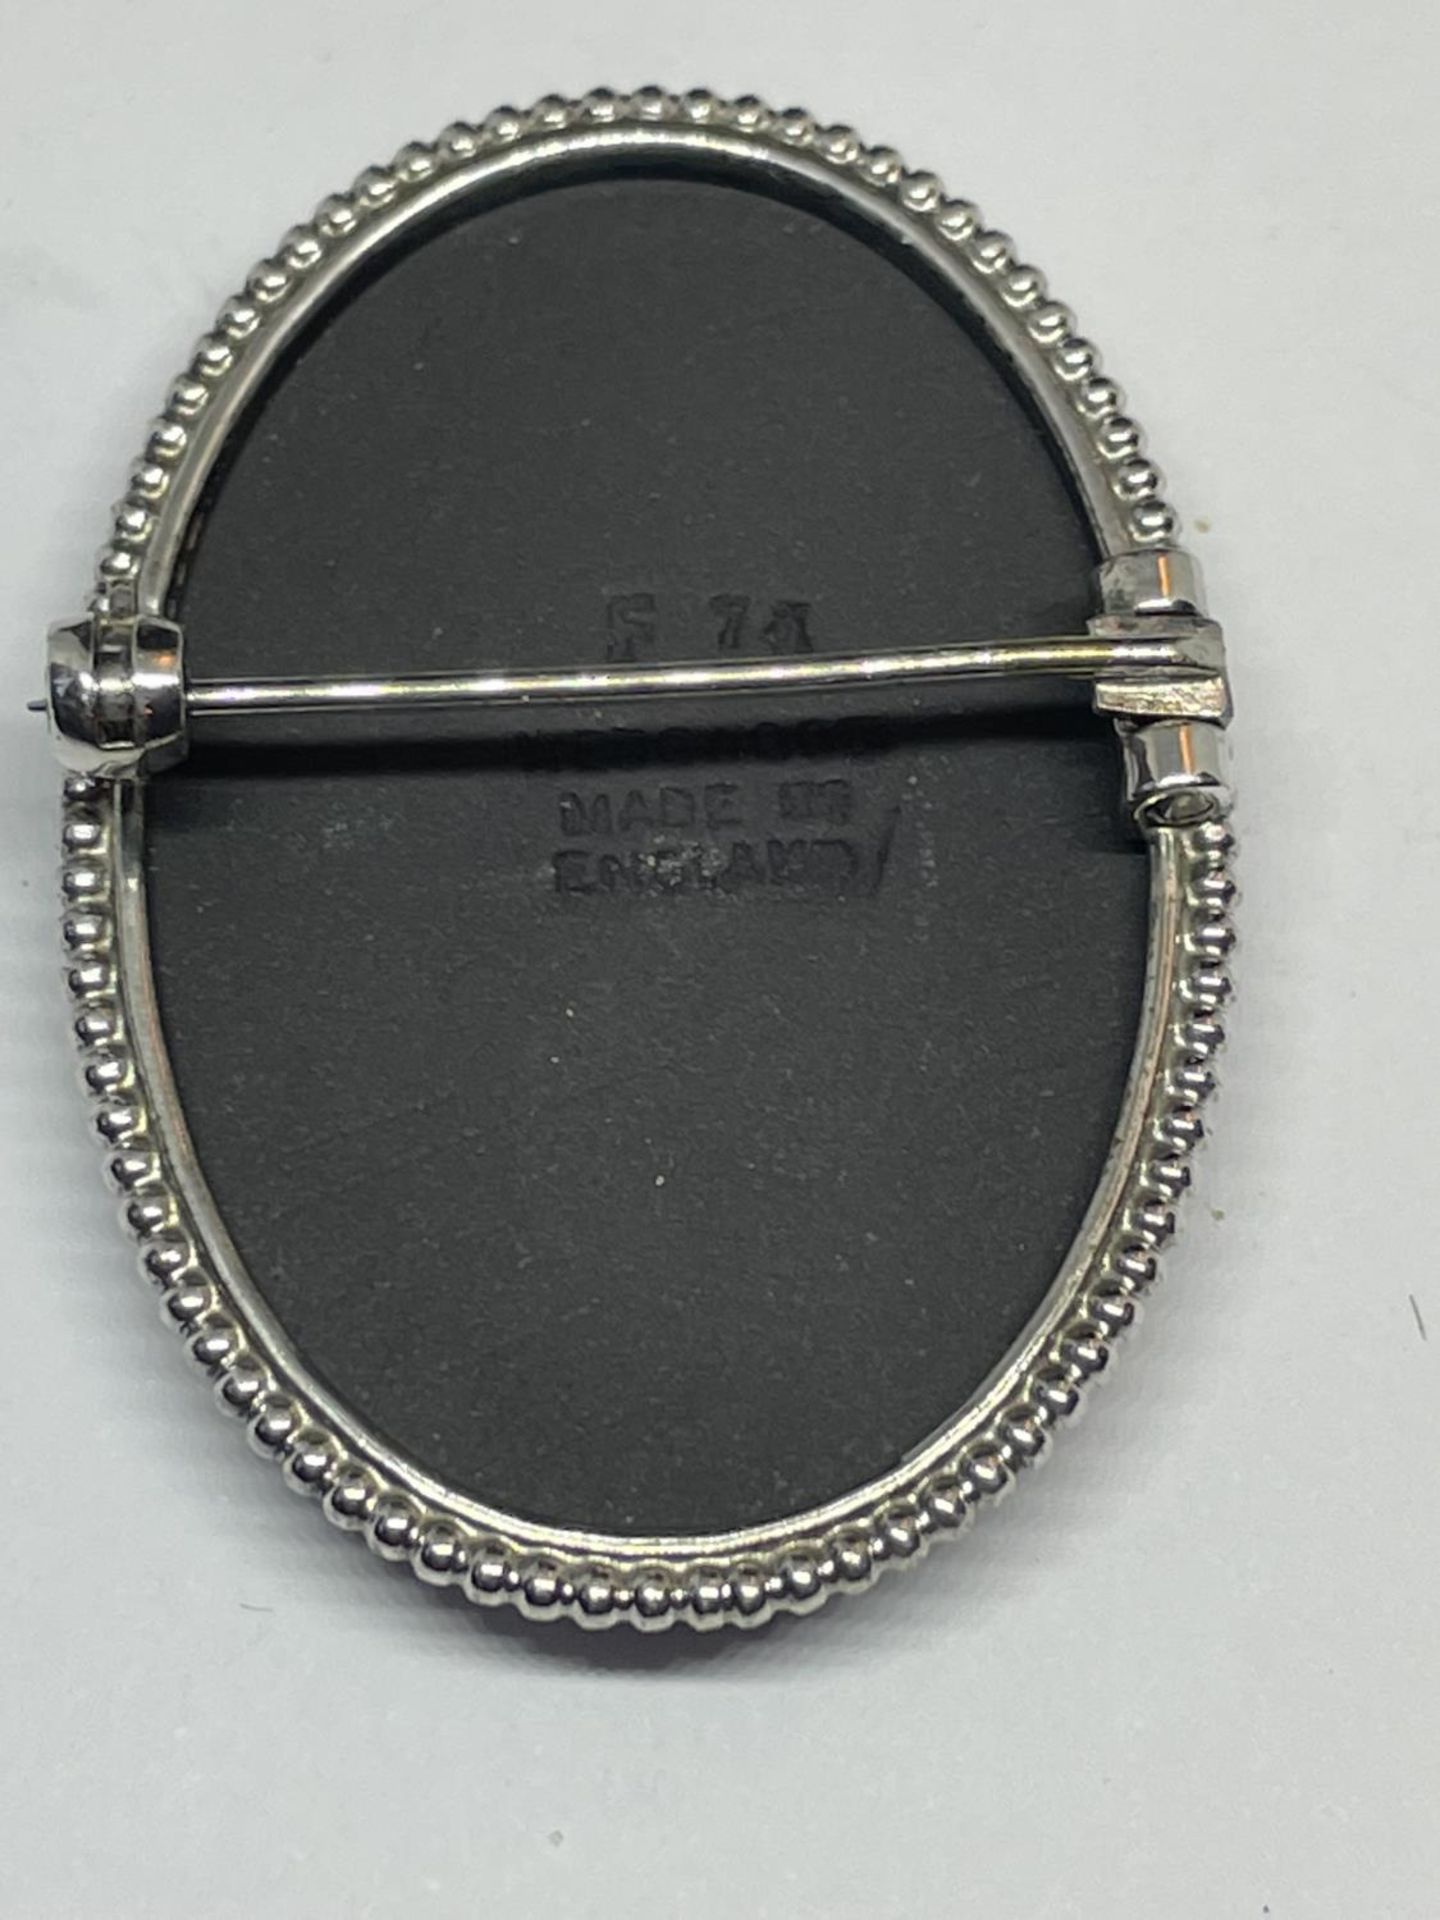 A SILVER MOUNTED BLACK WEDGWOOD JASPERWARE PLAQUE BROOCH IN A WEDGWOOD PRESENTATION BOX - Image 3 of 5